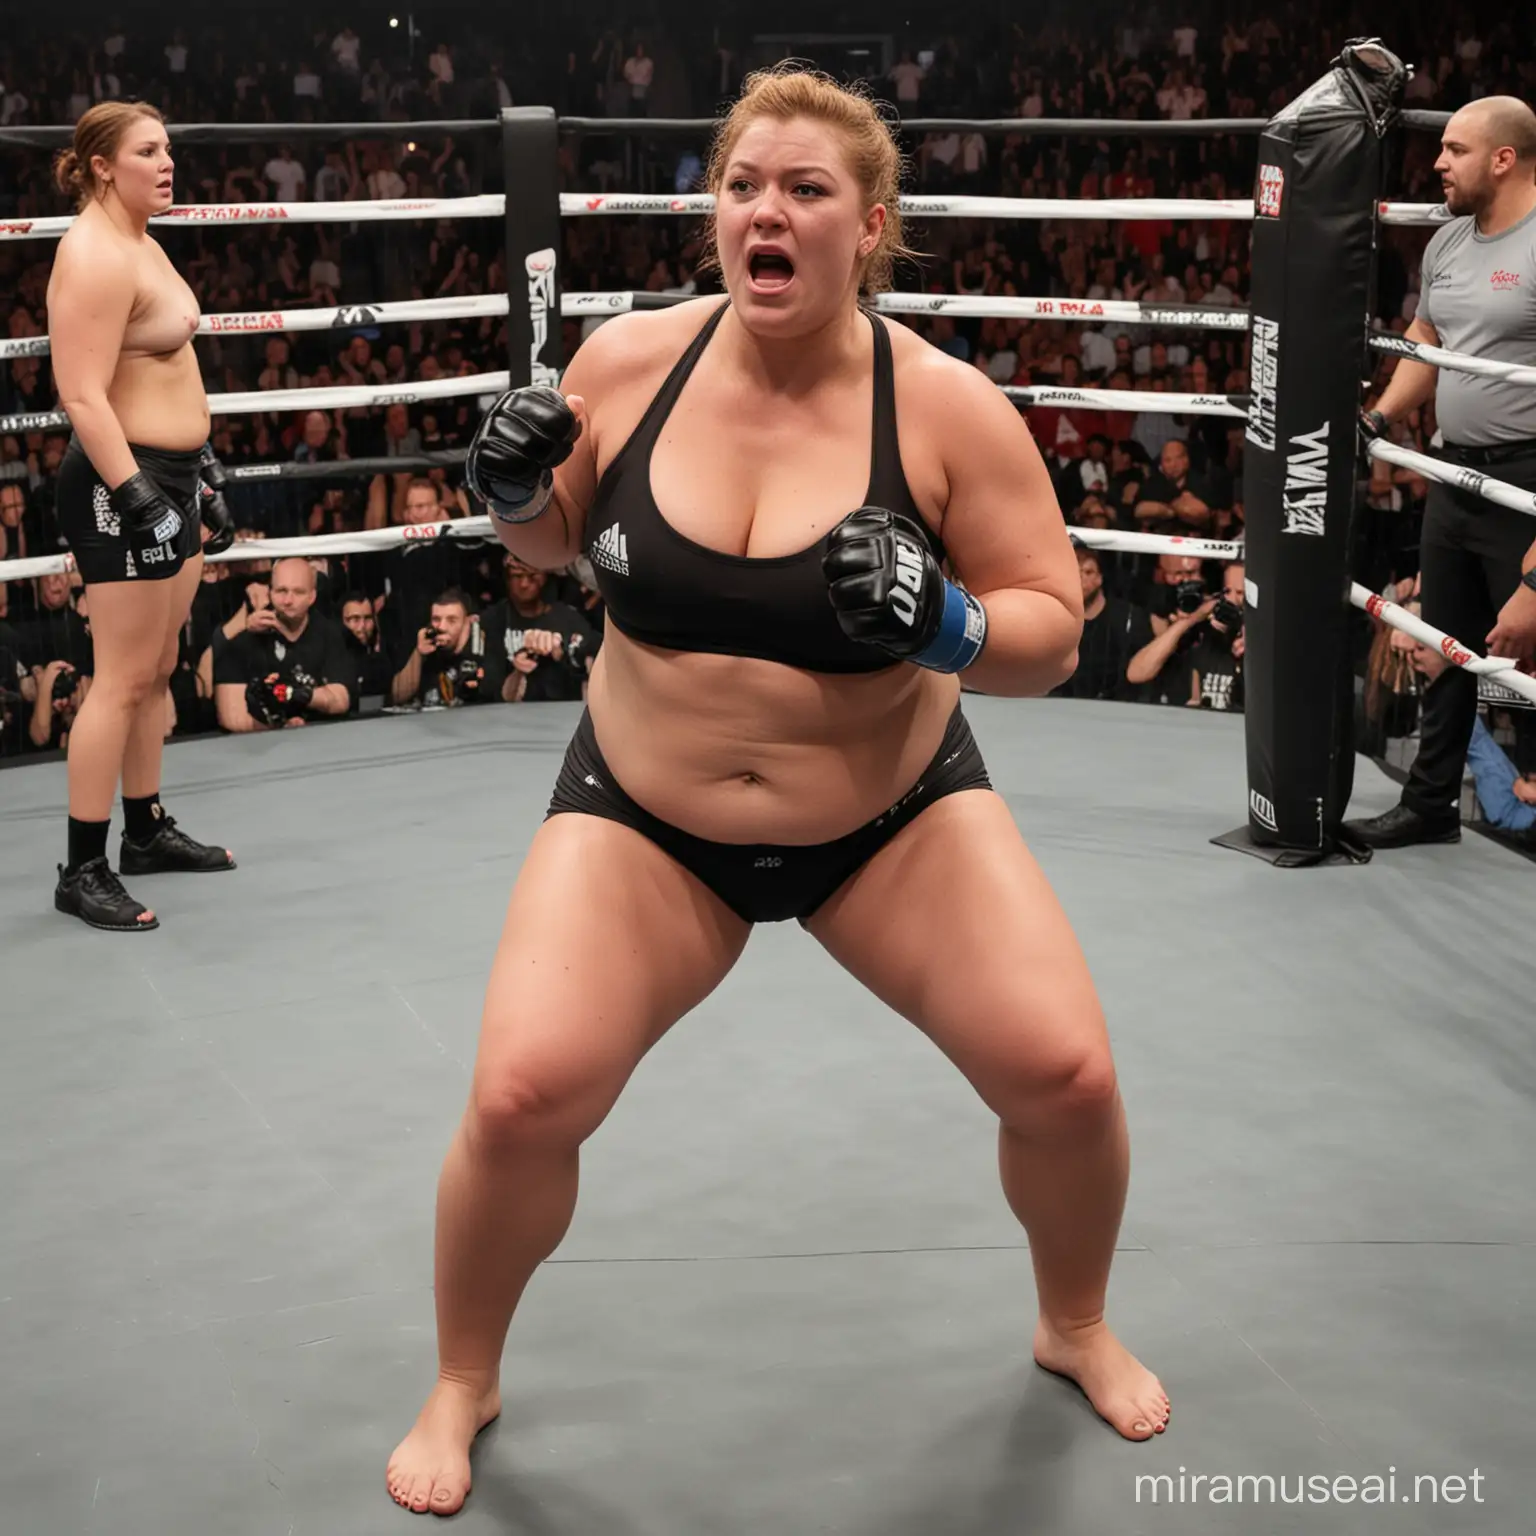 real life photo of overweight woman knocking herself out in mma ring